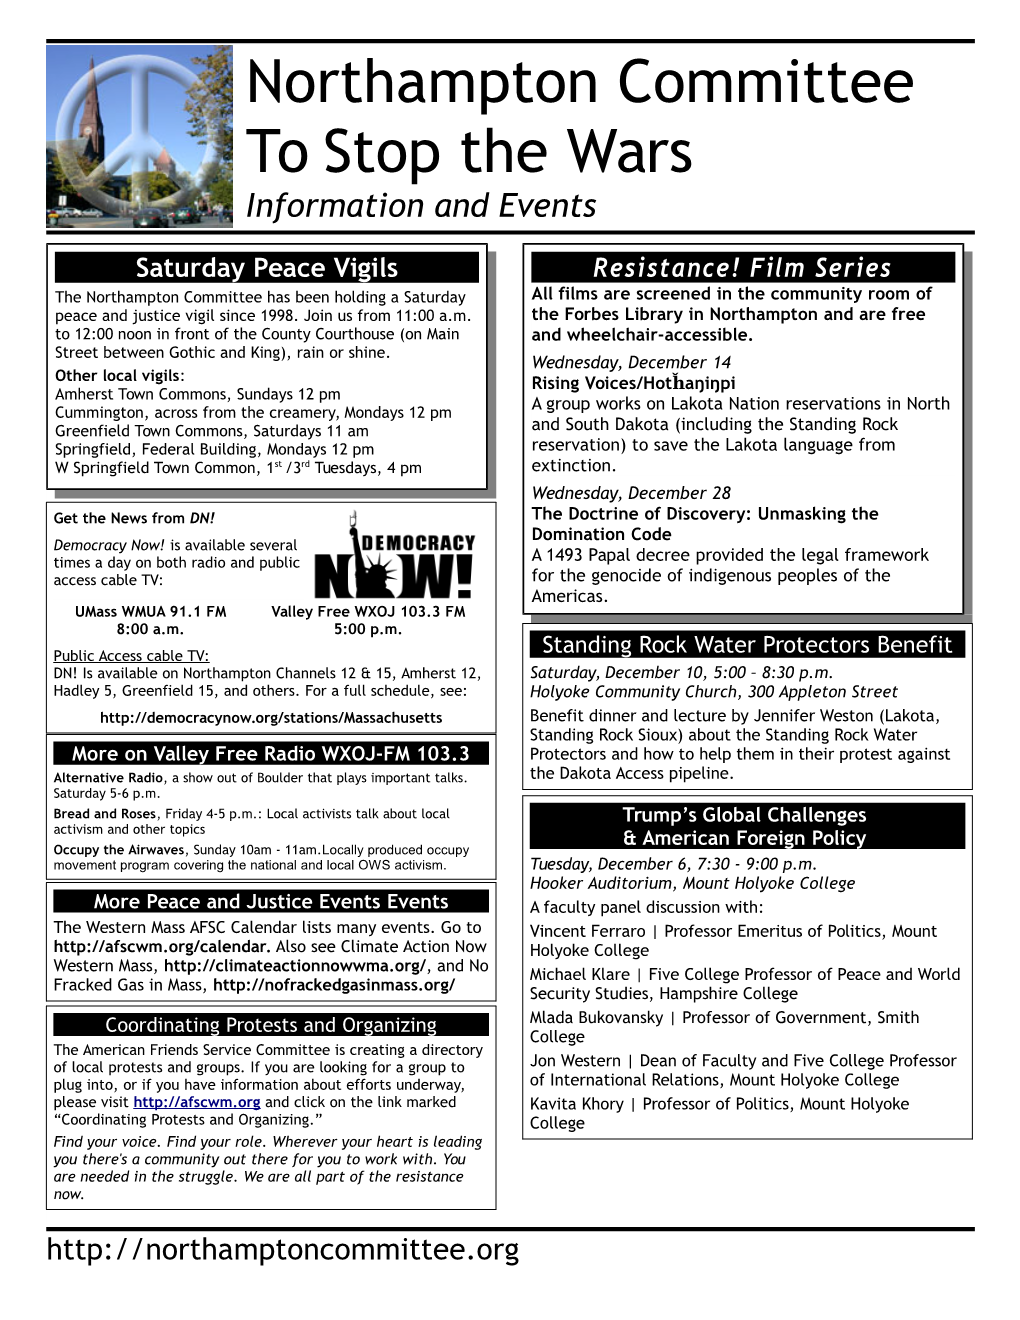 Northampton Committee to Stop the Wars Information and Events